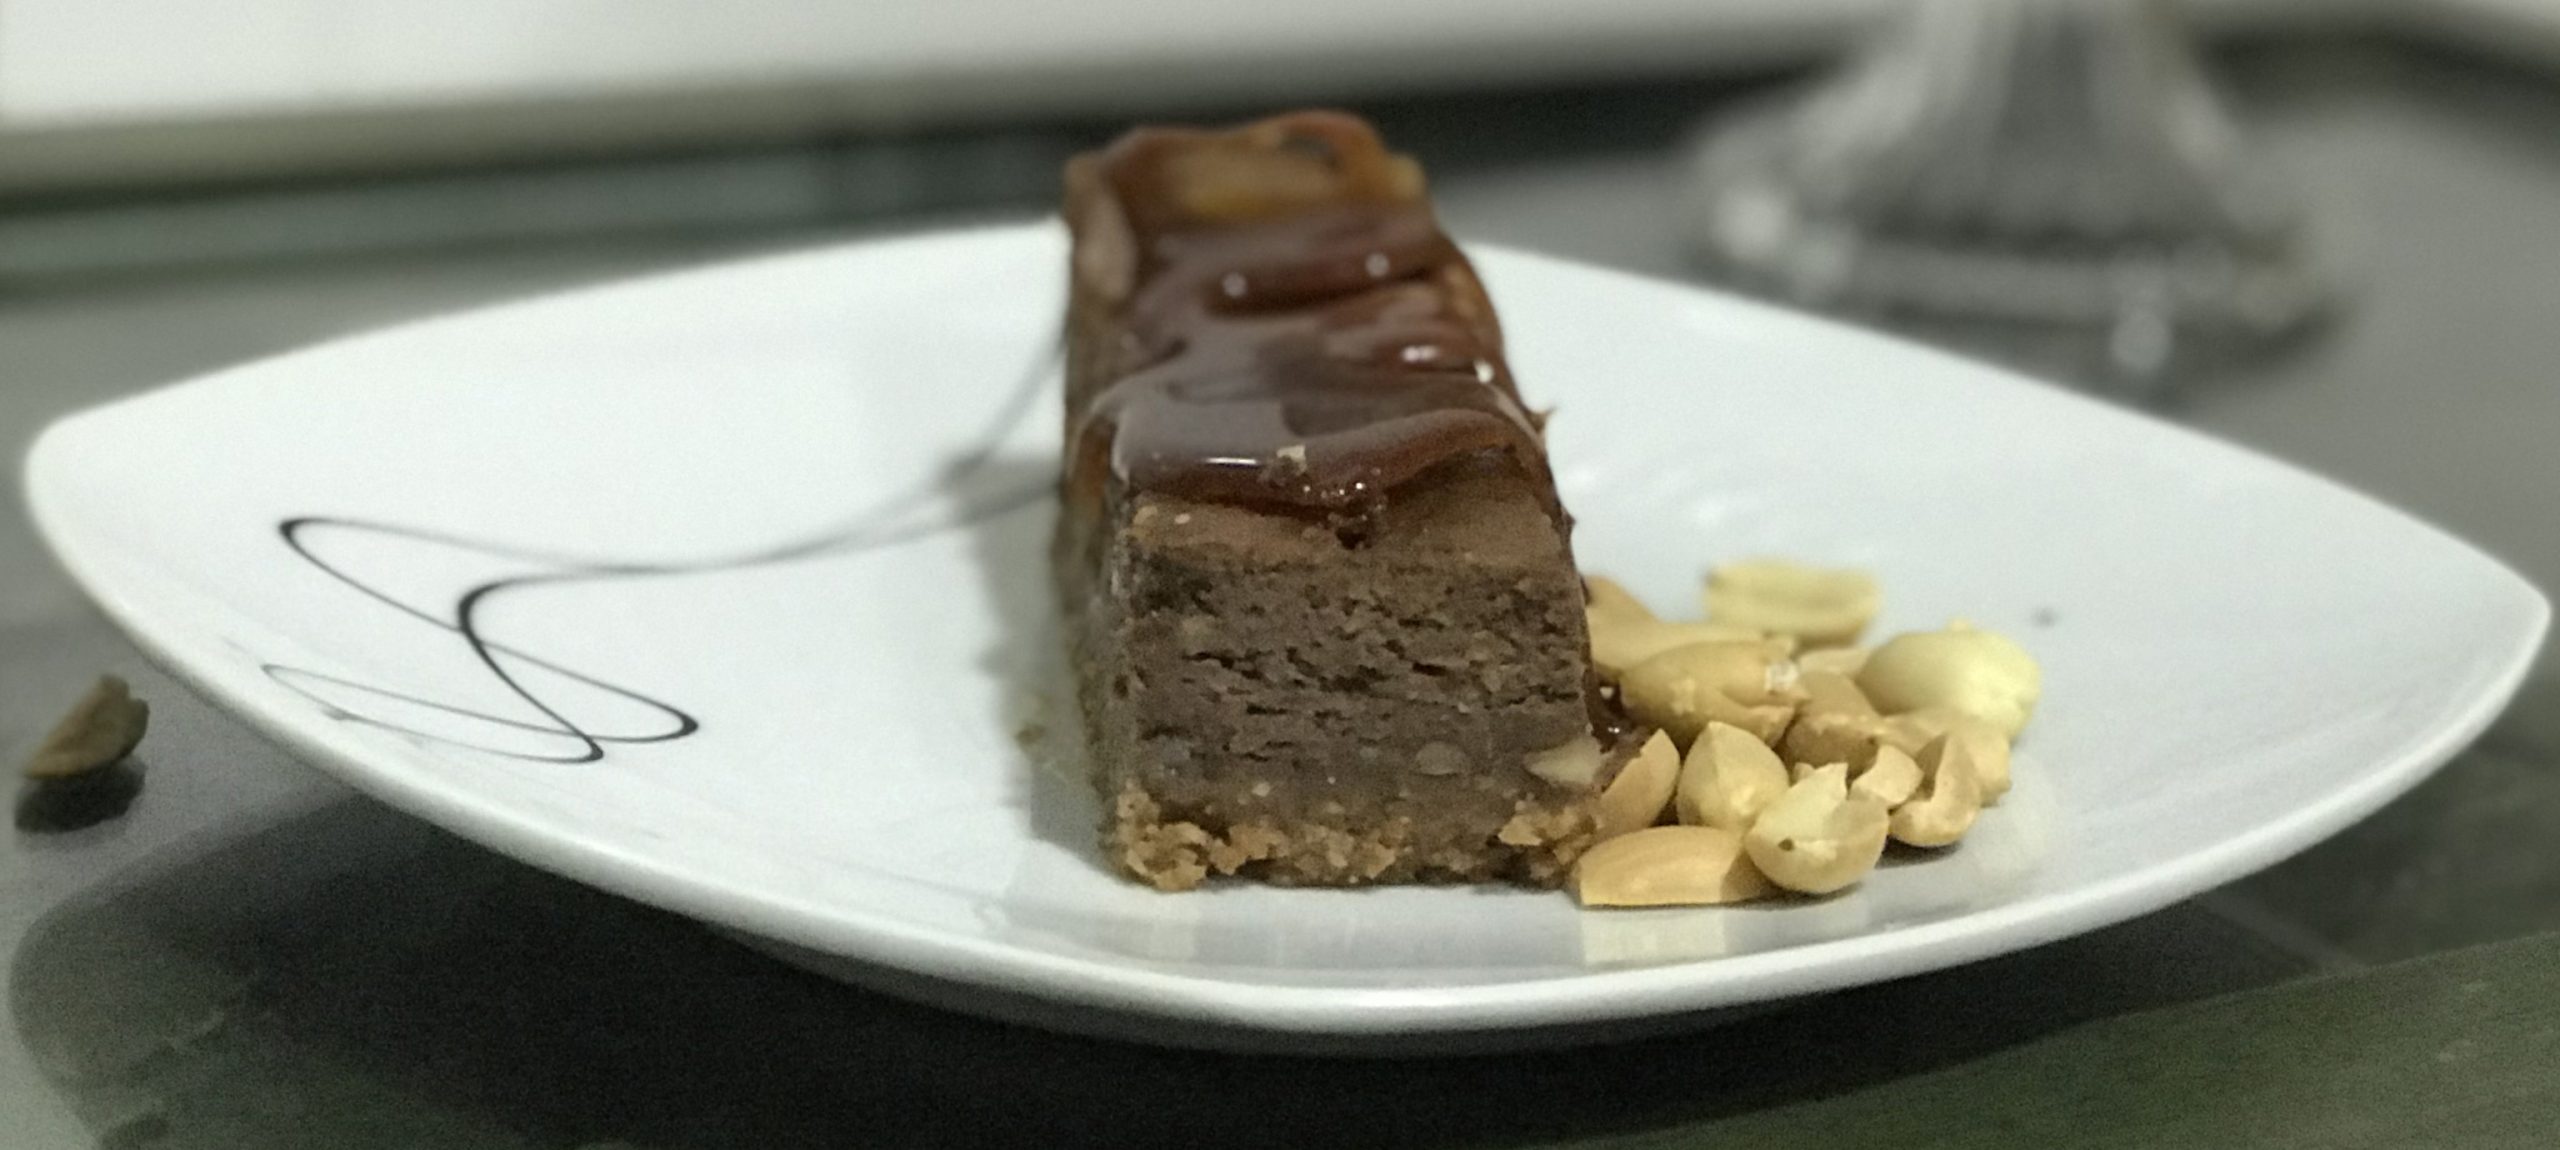 Barritas cheesecake "Snickers"